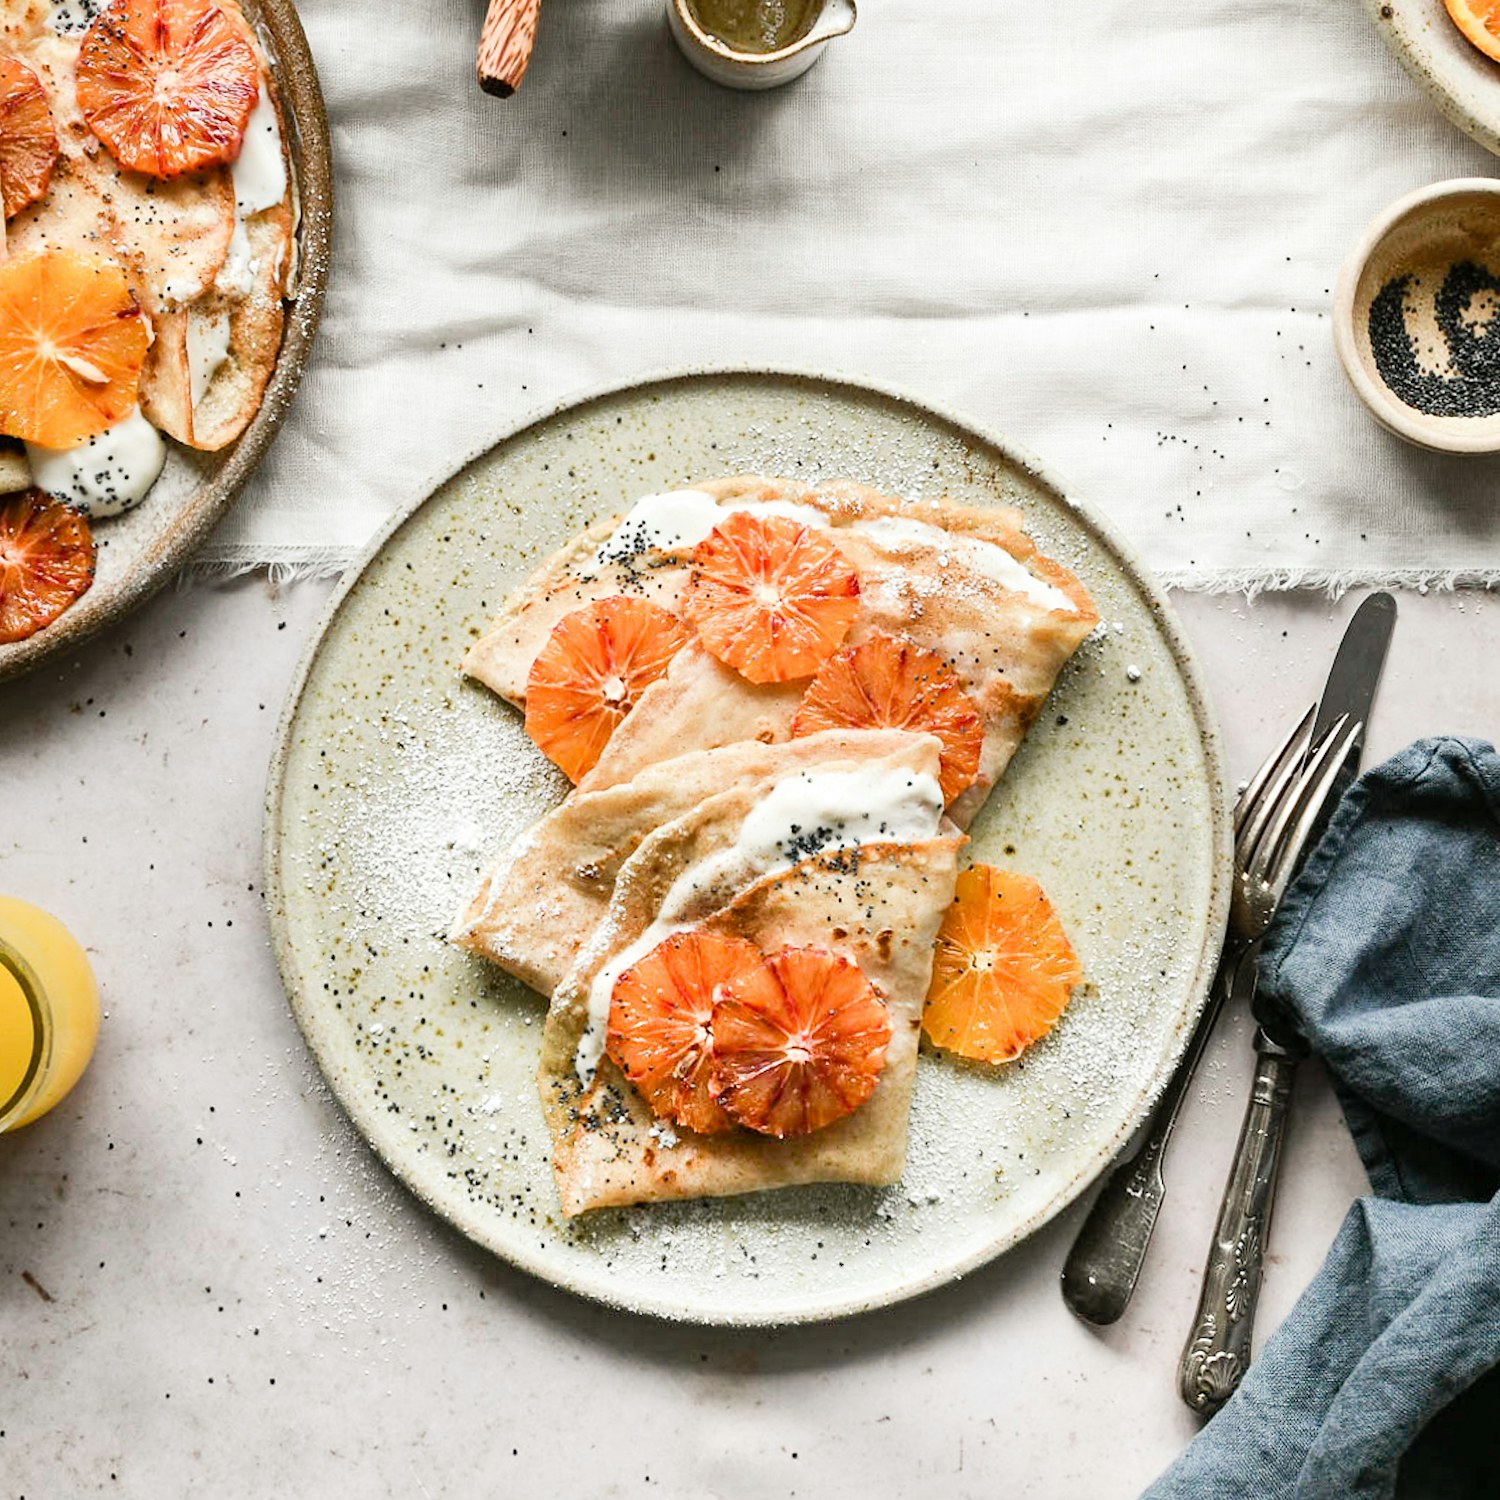 French Crepes, Blood orange, Poppy Seed